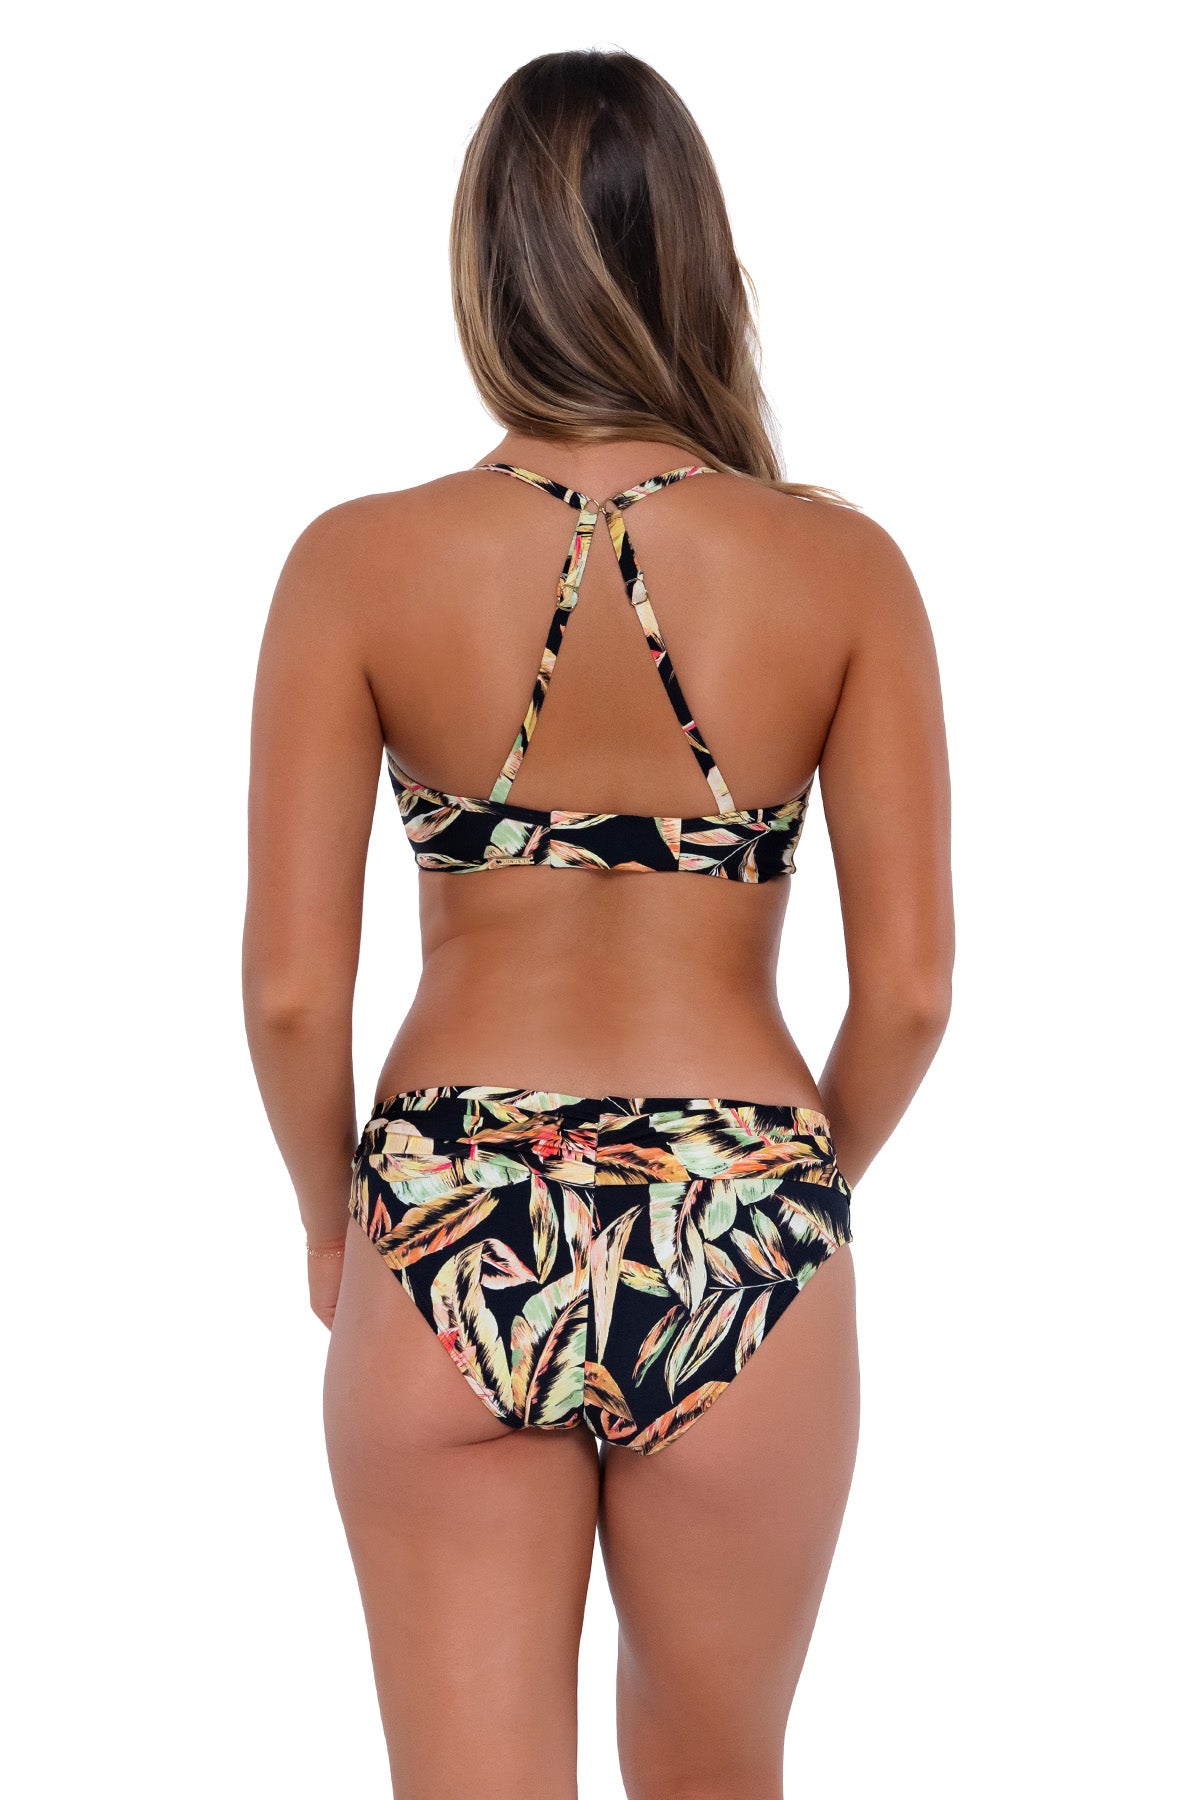 Back pose #1 of Taylor wearing Sunsets Retro Retreat Crossroads Underwire Top showing crossback straps with matching Unforgettable Bottom bikini